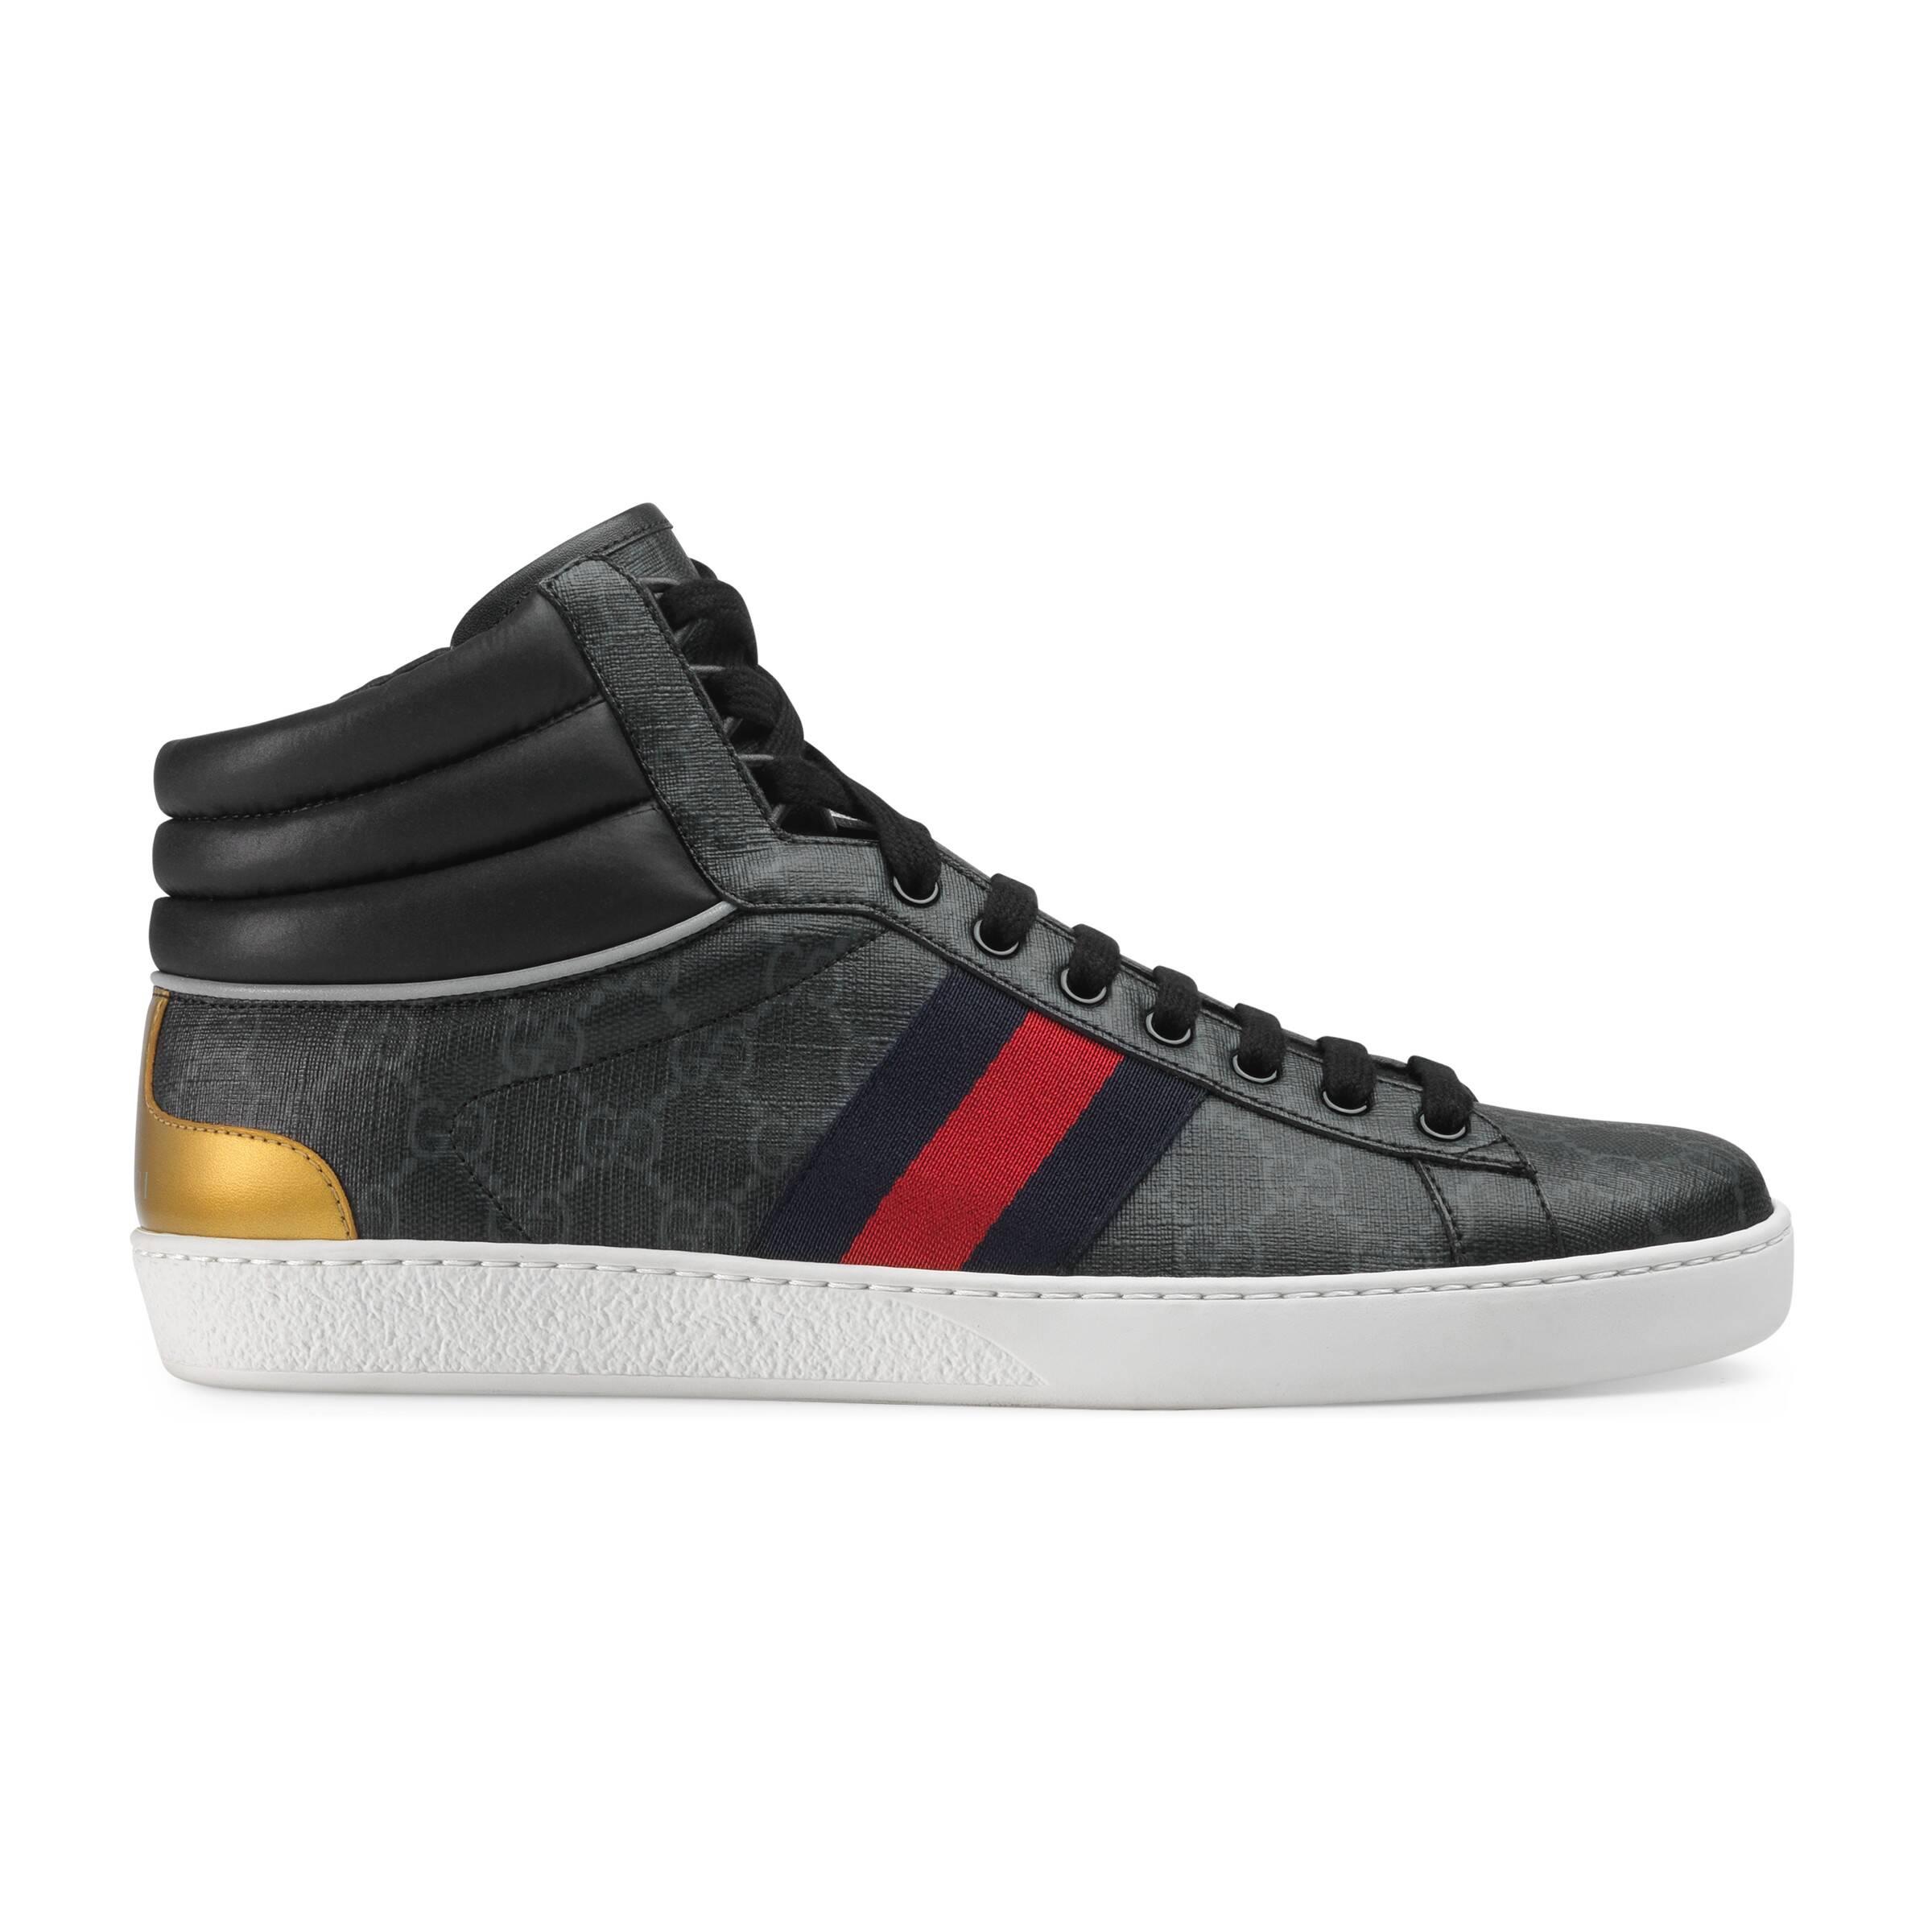 Gucci Ace GG High-top Sneaker in Black/ Anthracite (Black) for Men - Lyst